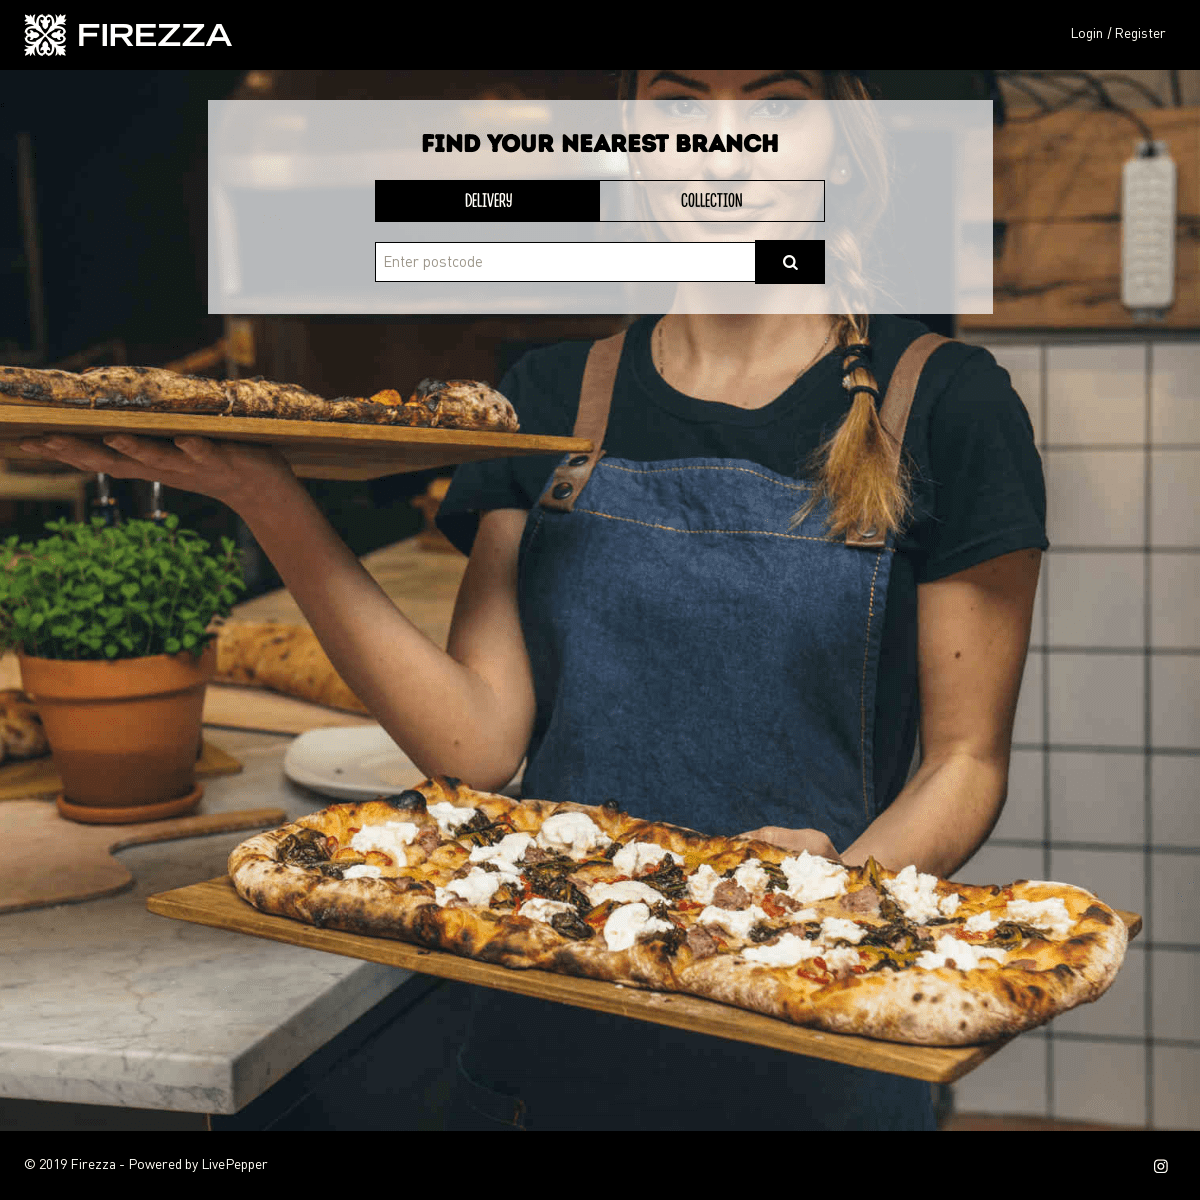 A complete backup of firezza-orders.com